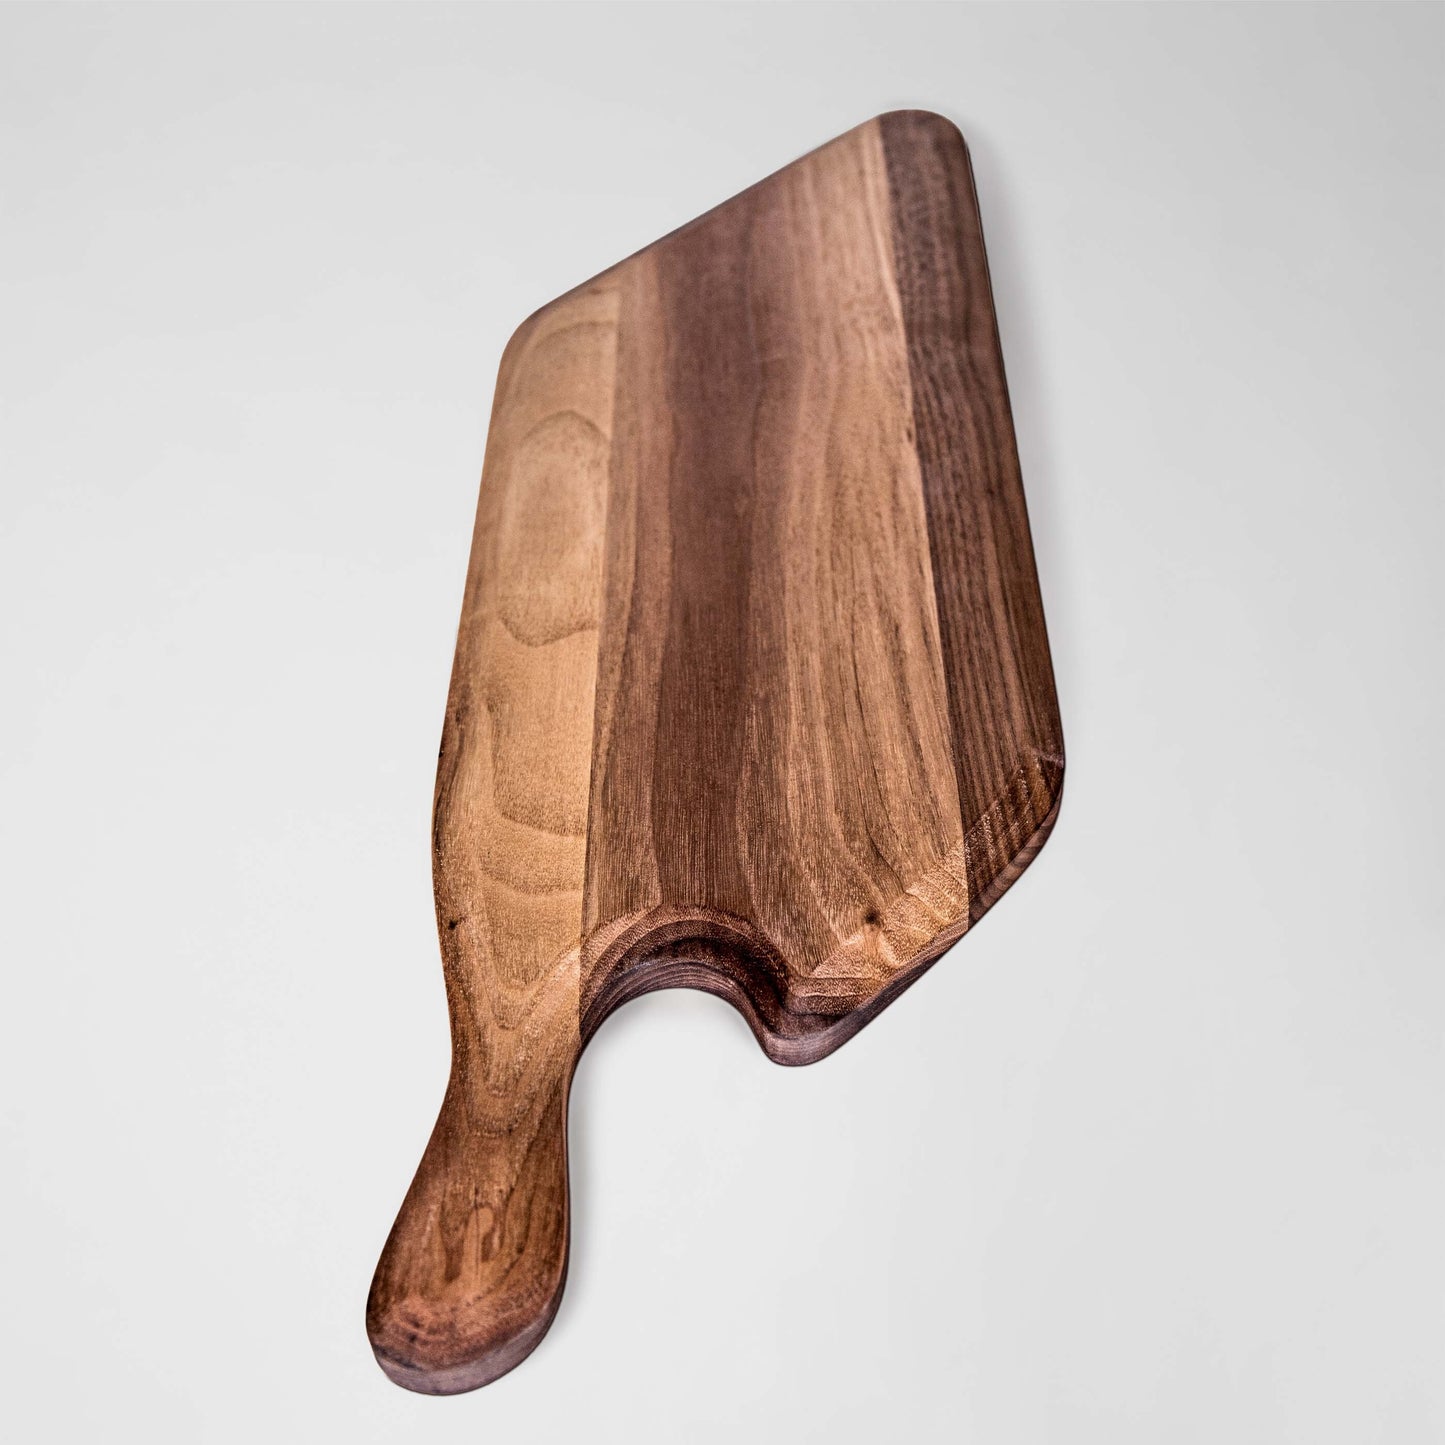 Taapa - Serving board made of walnut or ash